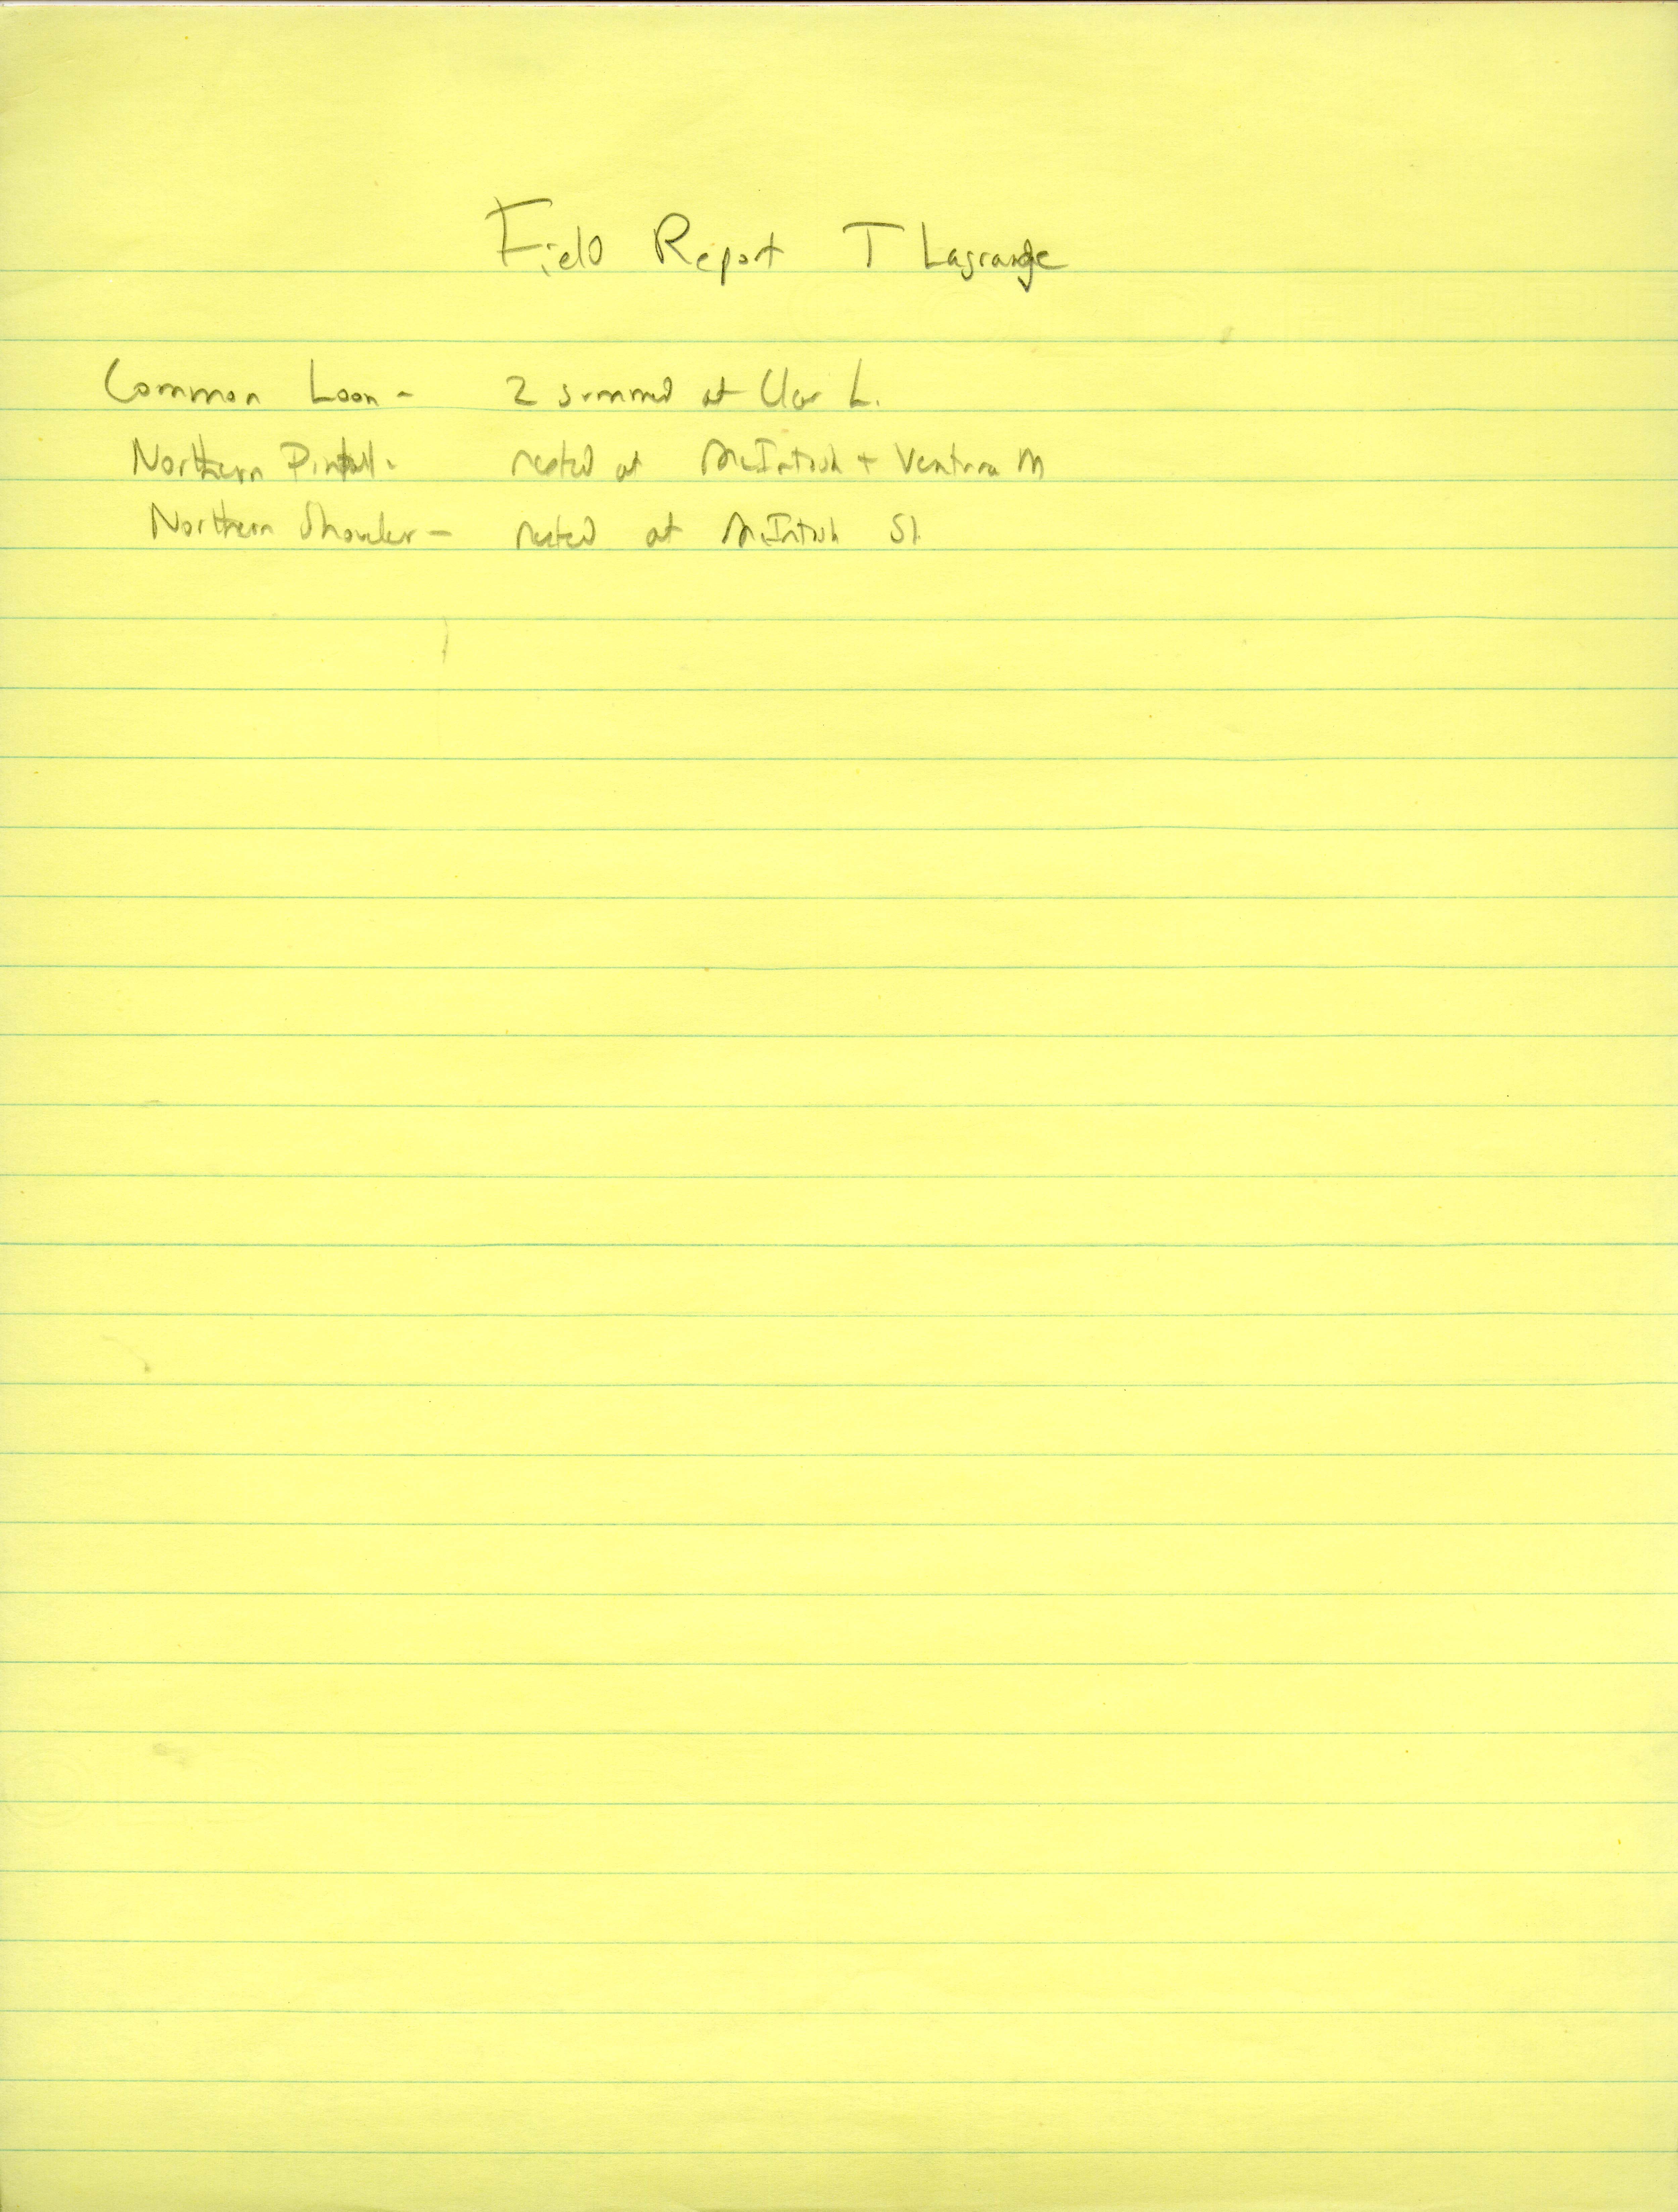 Field notes contributed by Ted LaGrange, summer 1985